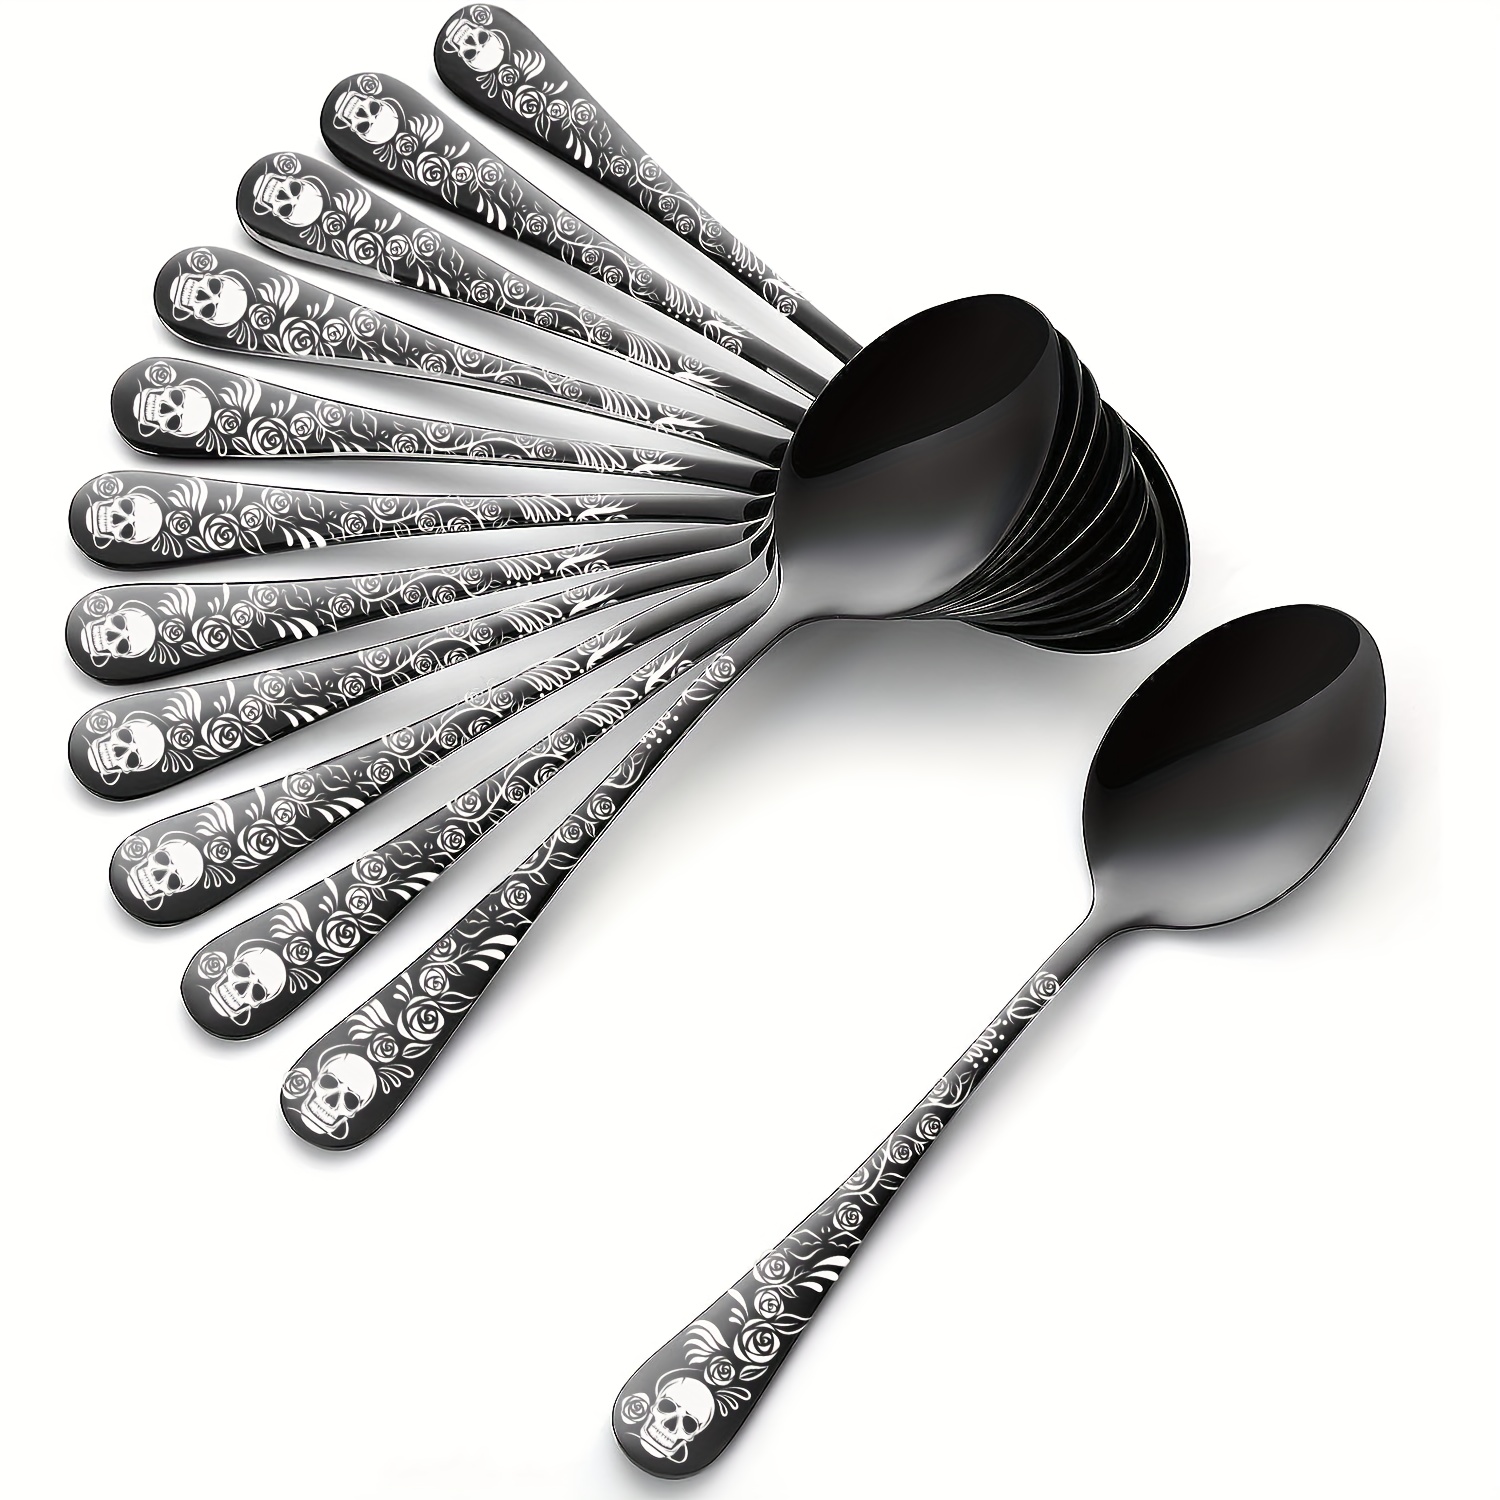 

Gothic & Rose Stainless Steel Spoons - 6/12 Piece, 6.9" Mirror-polished Dessert & Cereal Spoons For Halloween, Day Of The Dead, Cinco De Mayo, Housewarming Gifts